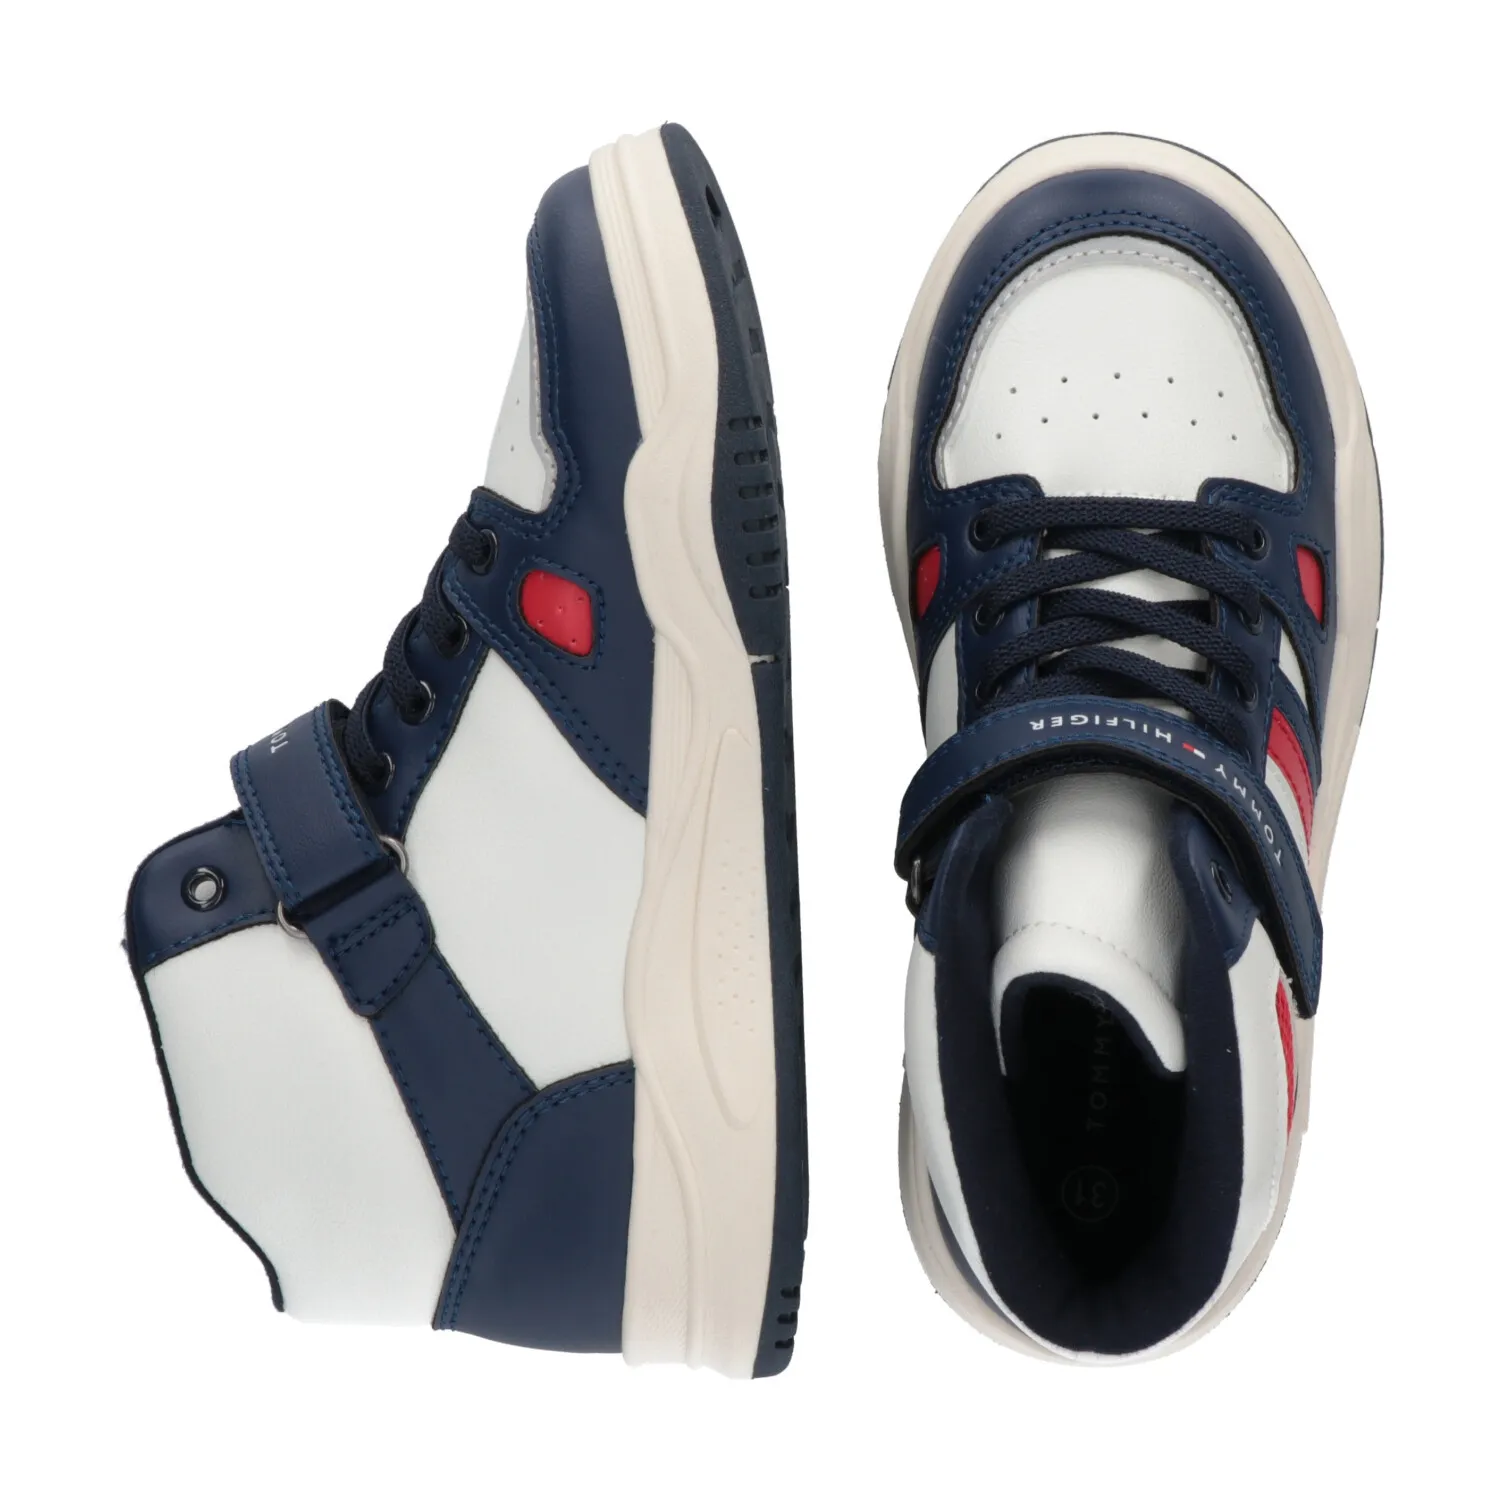 Lace up/Velcro White/Red Boys Stripes - Blue/Off Choice+Attitude | HILFIGER Top High TOMMY Sneakers